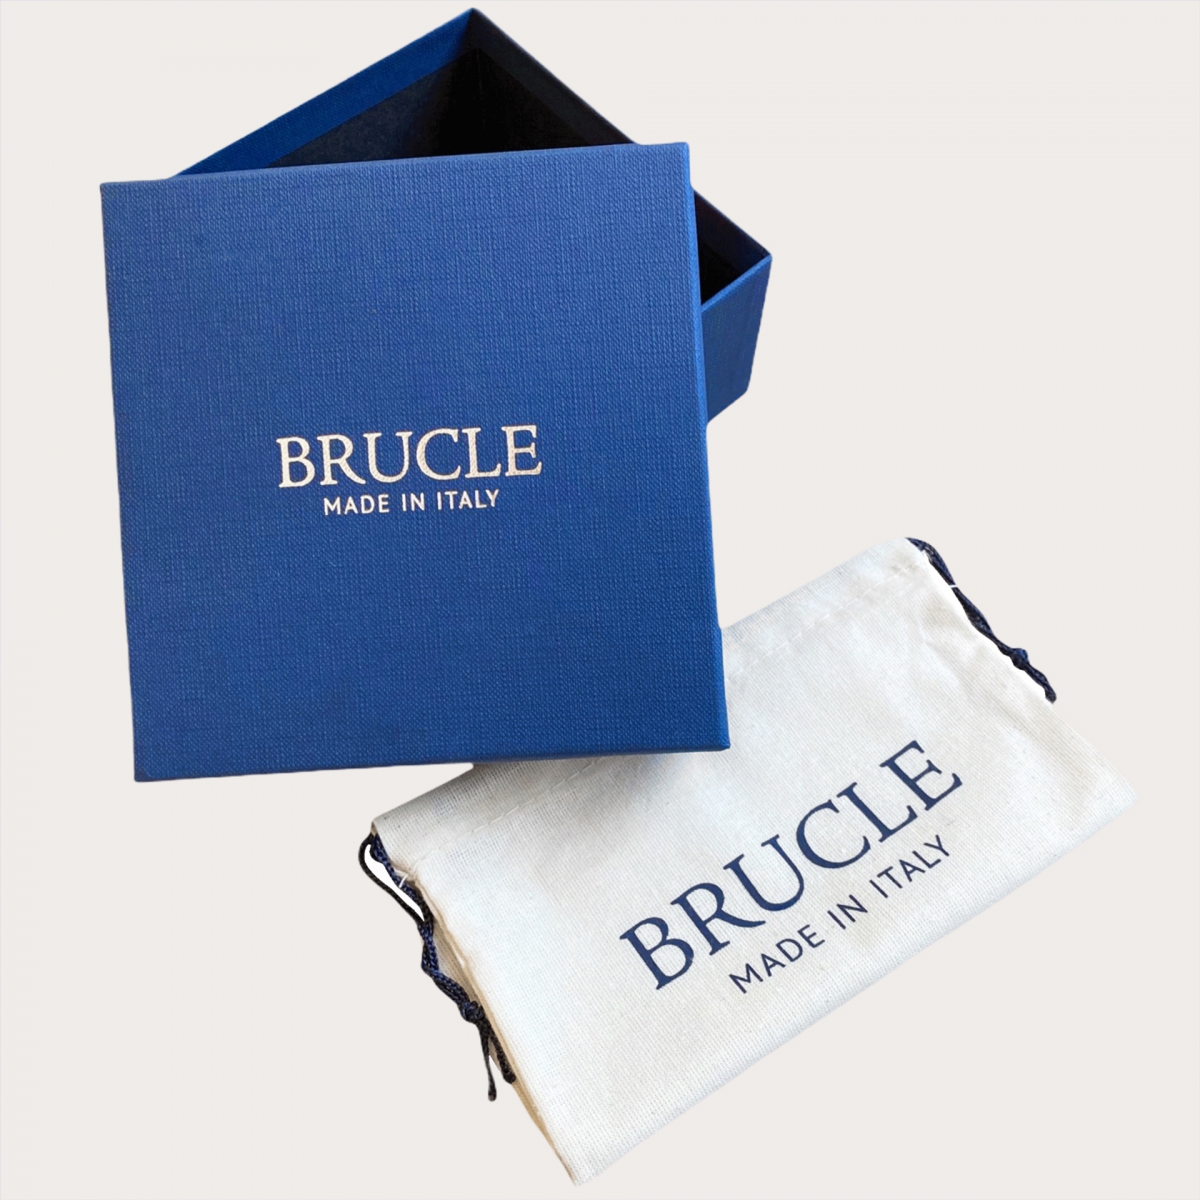 BRUCLE Nickel free handcolored leather belt for men, grey shaded blue navy